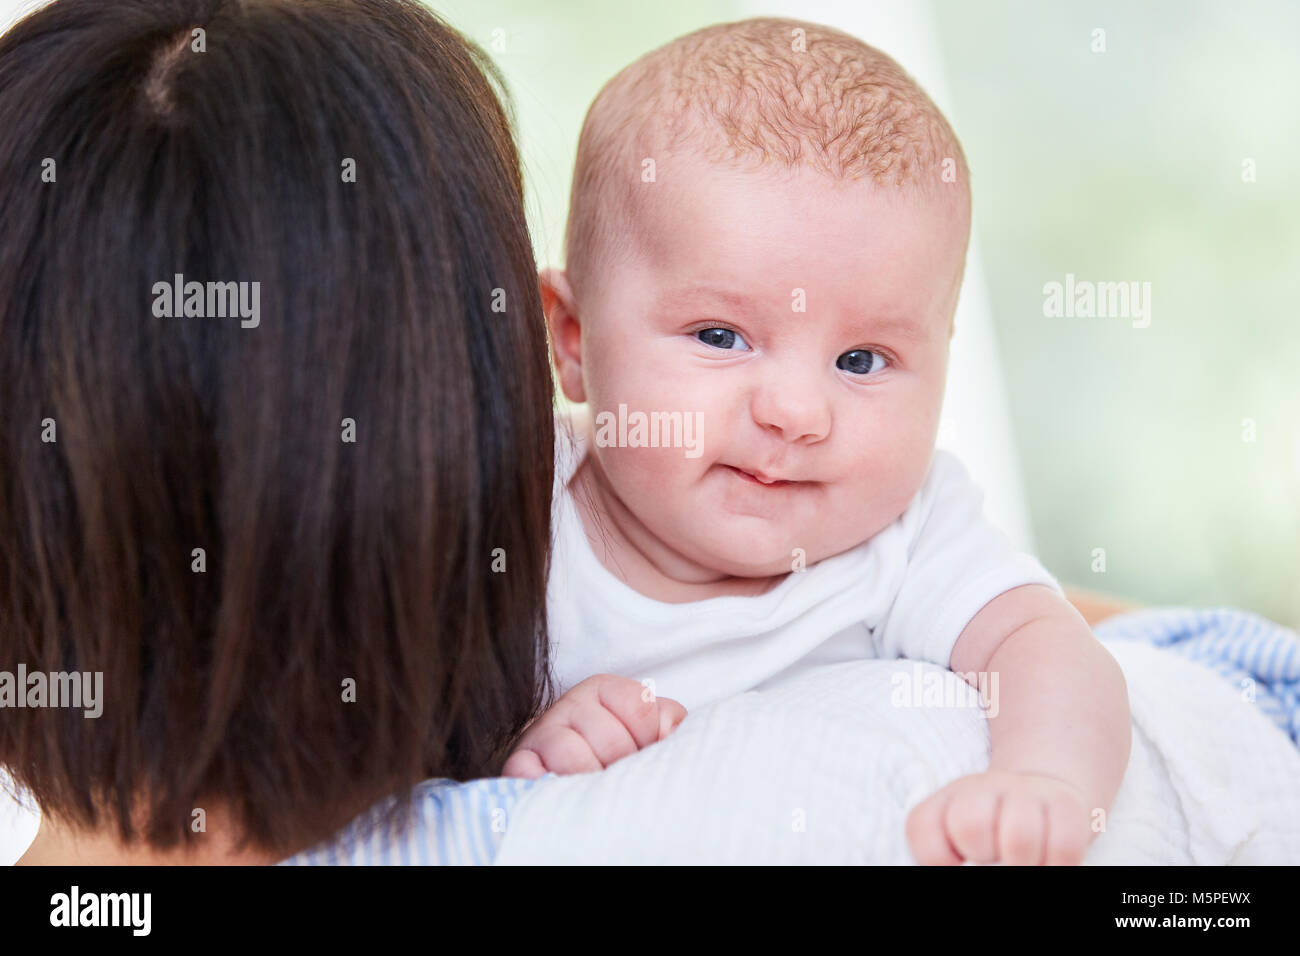 Newborn cute baby on mother's arms looks curious Stock Photo